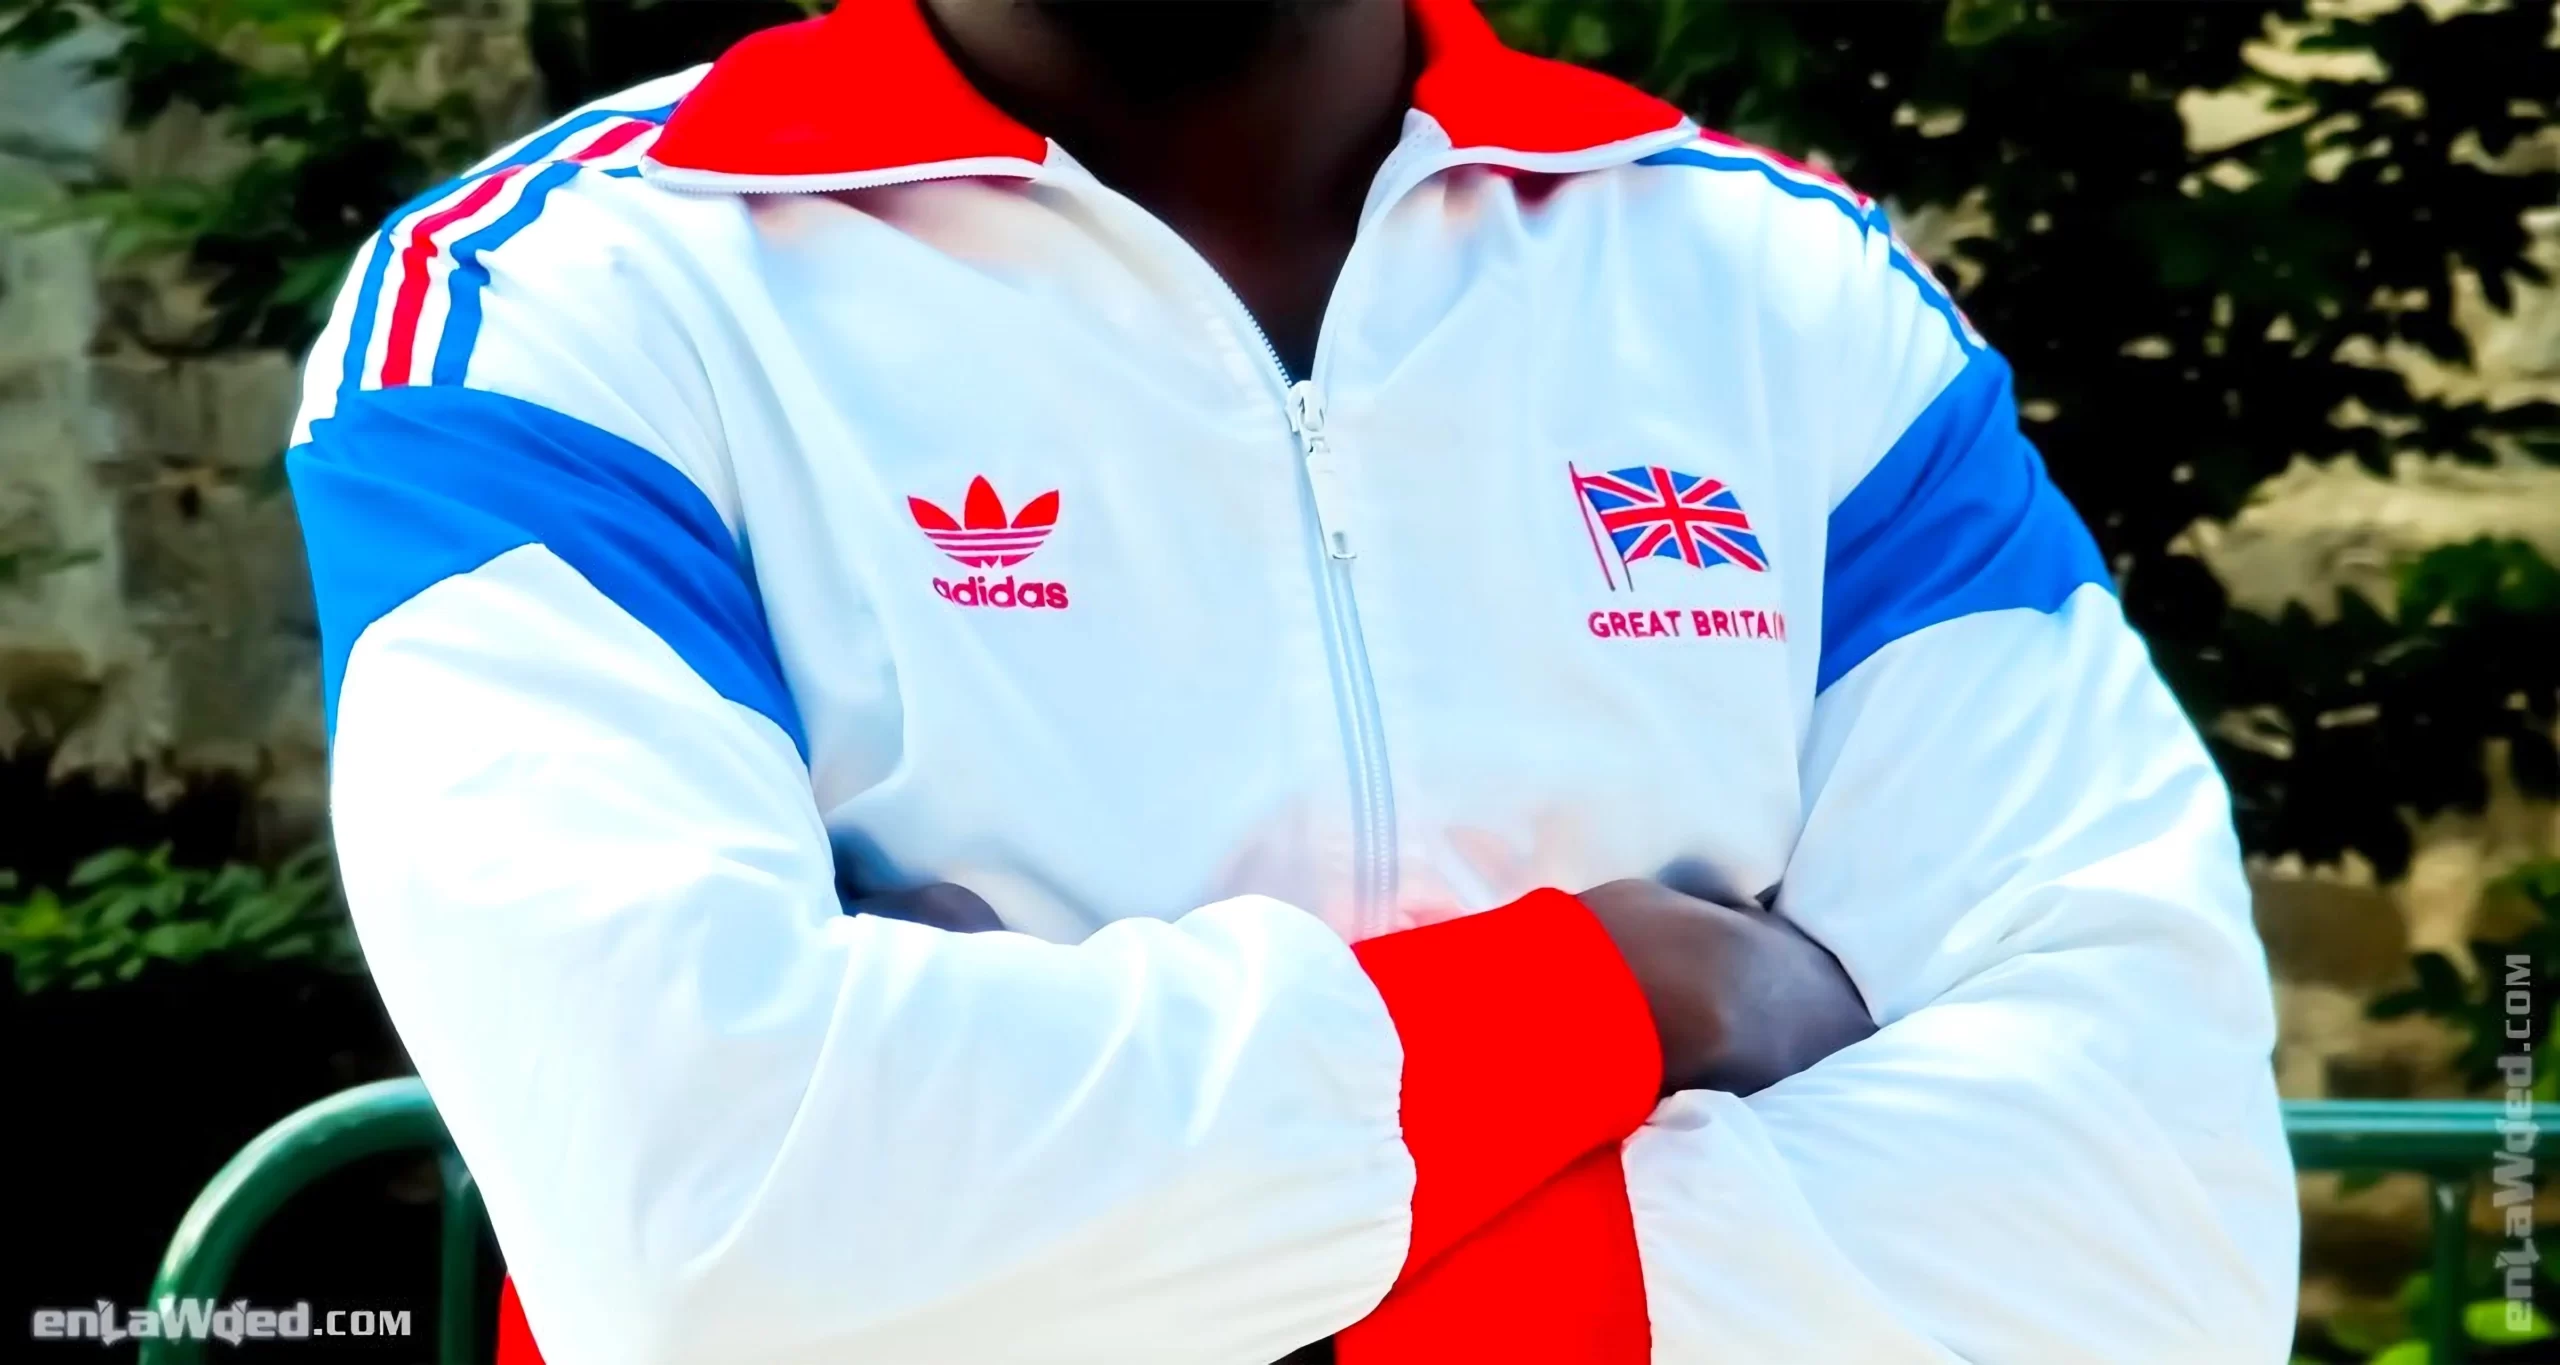 Men’s 2005 Great Britain Olympic ’84 TT by Adidas: Supported (EnLawded.com file #lmcen53nhq0p1fcgcd)